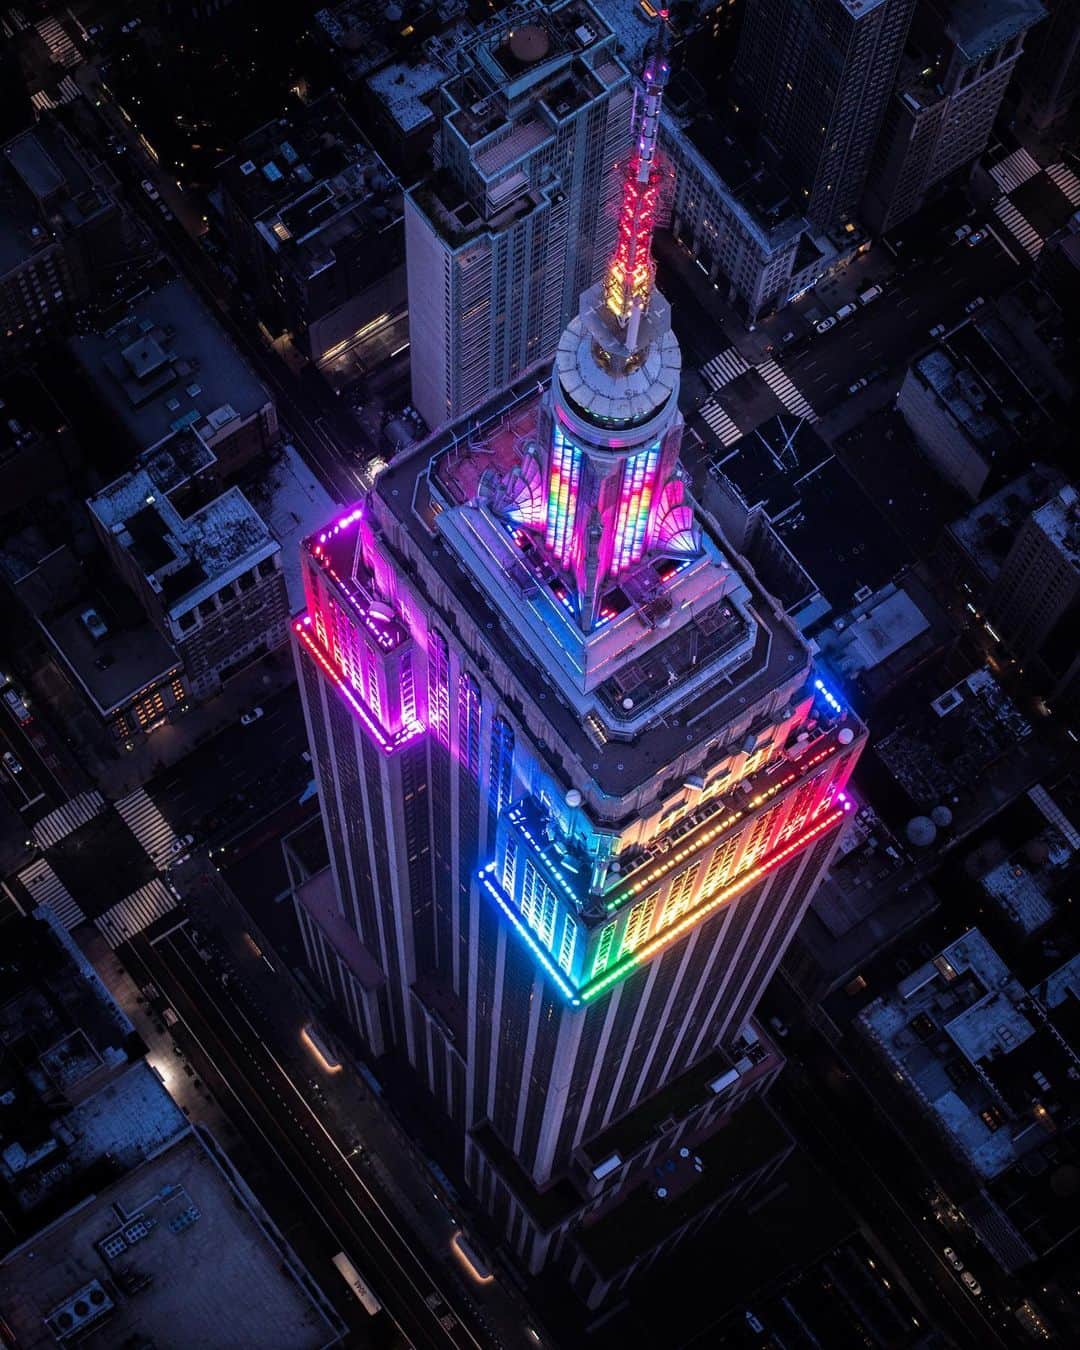 Empire State Buildingのインスタグラム：「Your camera roll 🤝 $5K – READ CAPTION 👇 ⠀⠀⠀⠀⠀⠀⠀⠀⠀  Win a cash prize between $500-$5000 just for a photo (or video!) of me or my views… ⠀⠀⠀⠀⠀⠀⠀⠀⠀  My 2023 photo contest is officially open! Enter your best pic (or video) before September 22 for your chance to win a cash prize between $500-$5000. ⠀⠀⠀⠀⠀⠀⠀⠀⠀  With 13 chances to win, you’ve got nothing to lose. Enter now in one of the 11 categories ⬇️ ⠀⠀⠀⠀⠀⠀⠀⠀⠀  ⭐️ General Entry 📲 Smart Phone Shot 👶 Beginner 💻 Photoshop/Edit 🌅 Sunrise & Sunset 👨‍👩‍👧‍👦 Visitors with the Views 🏙 Observatory Views ✈️ ESB x Citywide Shot 🌃 Nighttime 🎥 Video 🧒 Youth ⠀⠀⠀⠀⠀⠀⠀⠀  Open to 13 or older where required non-CA residents of the USA only.   Enter at the link in my bio」